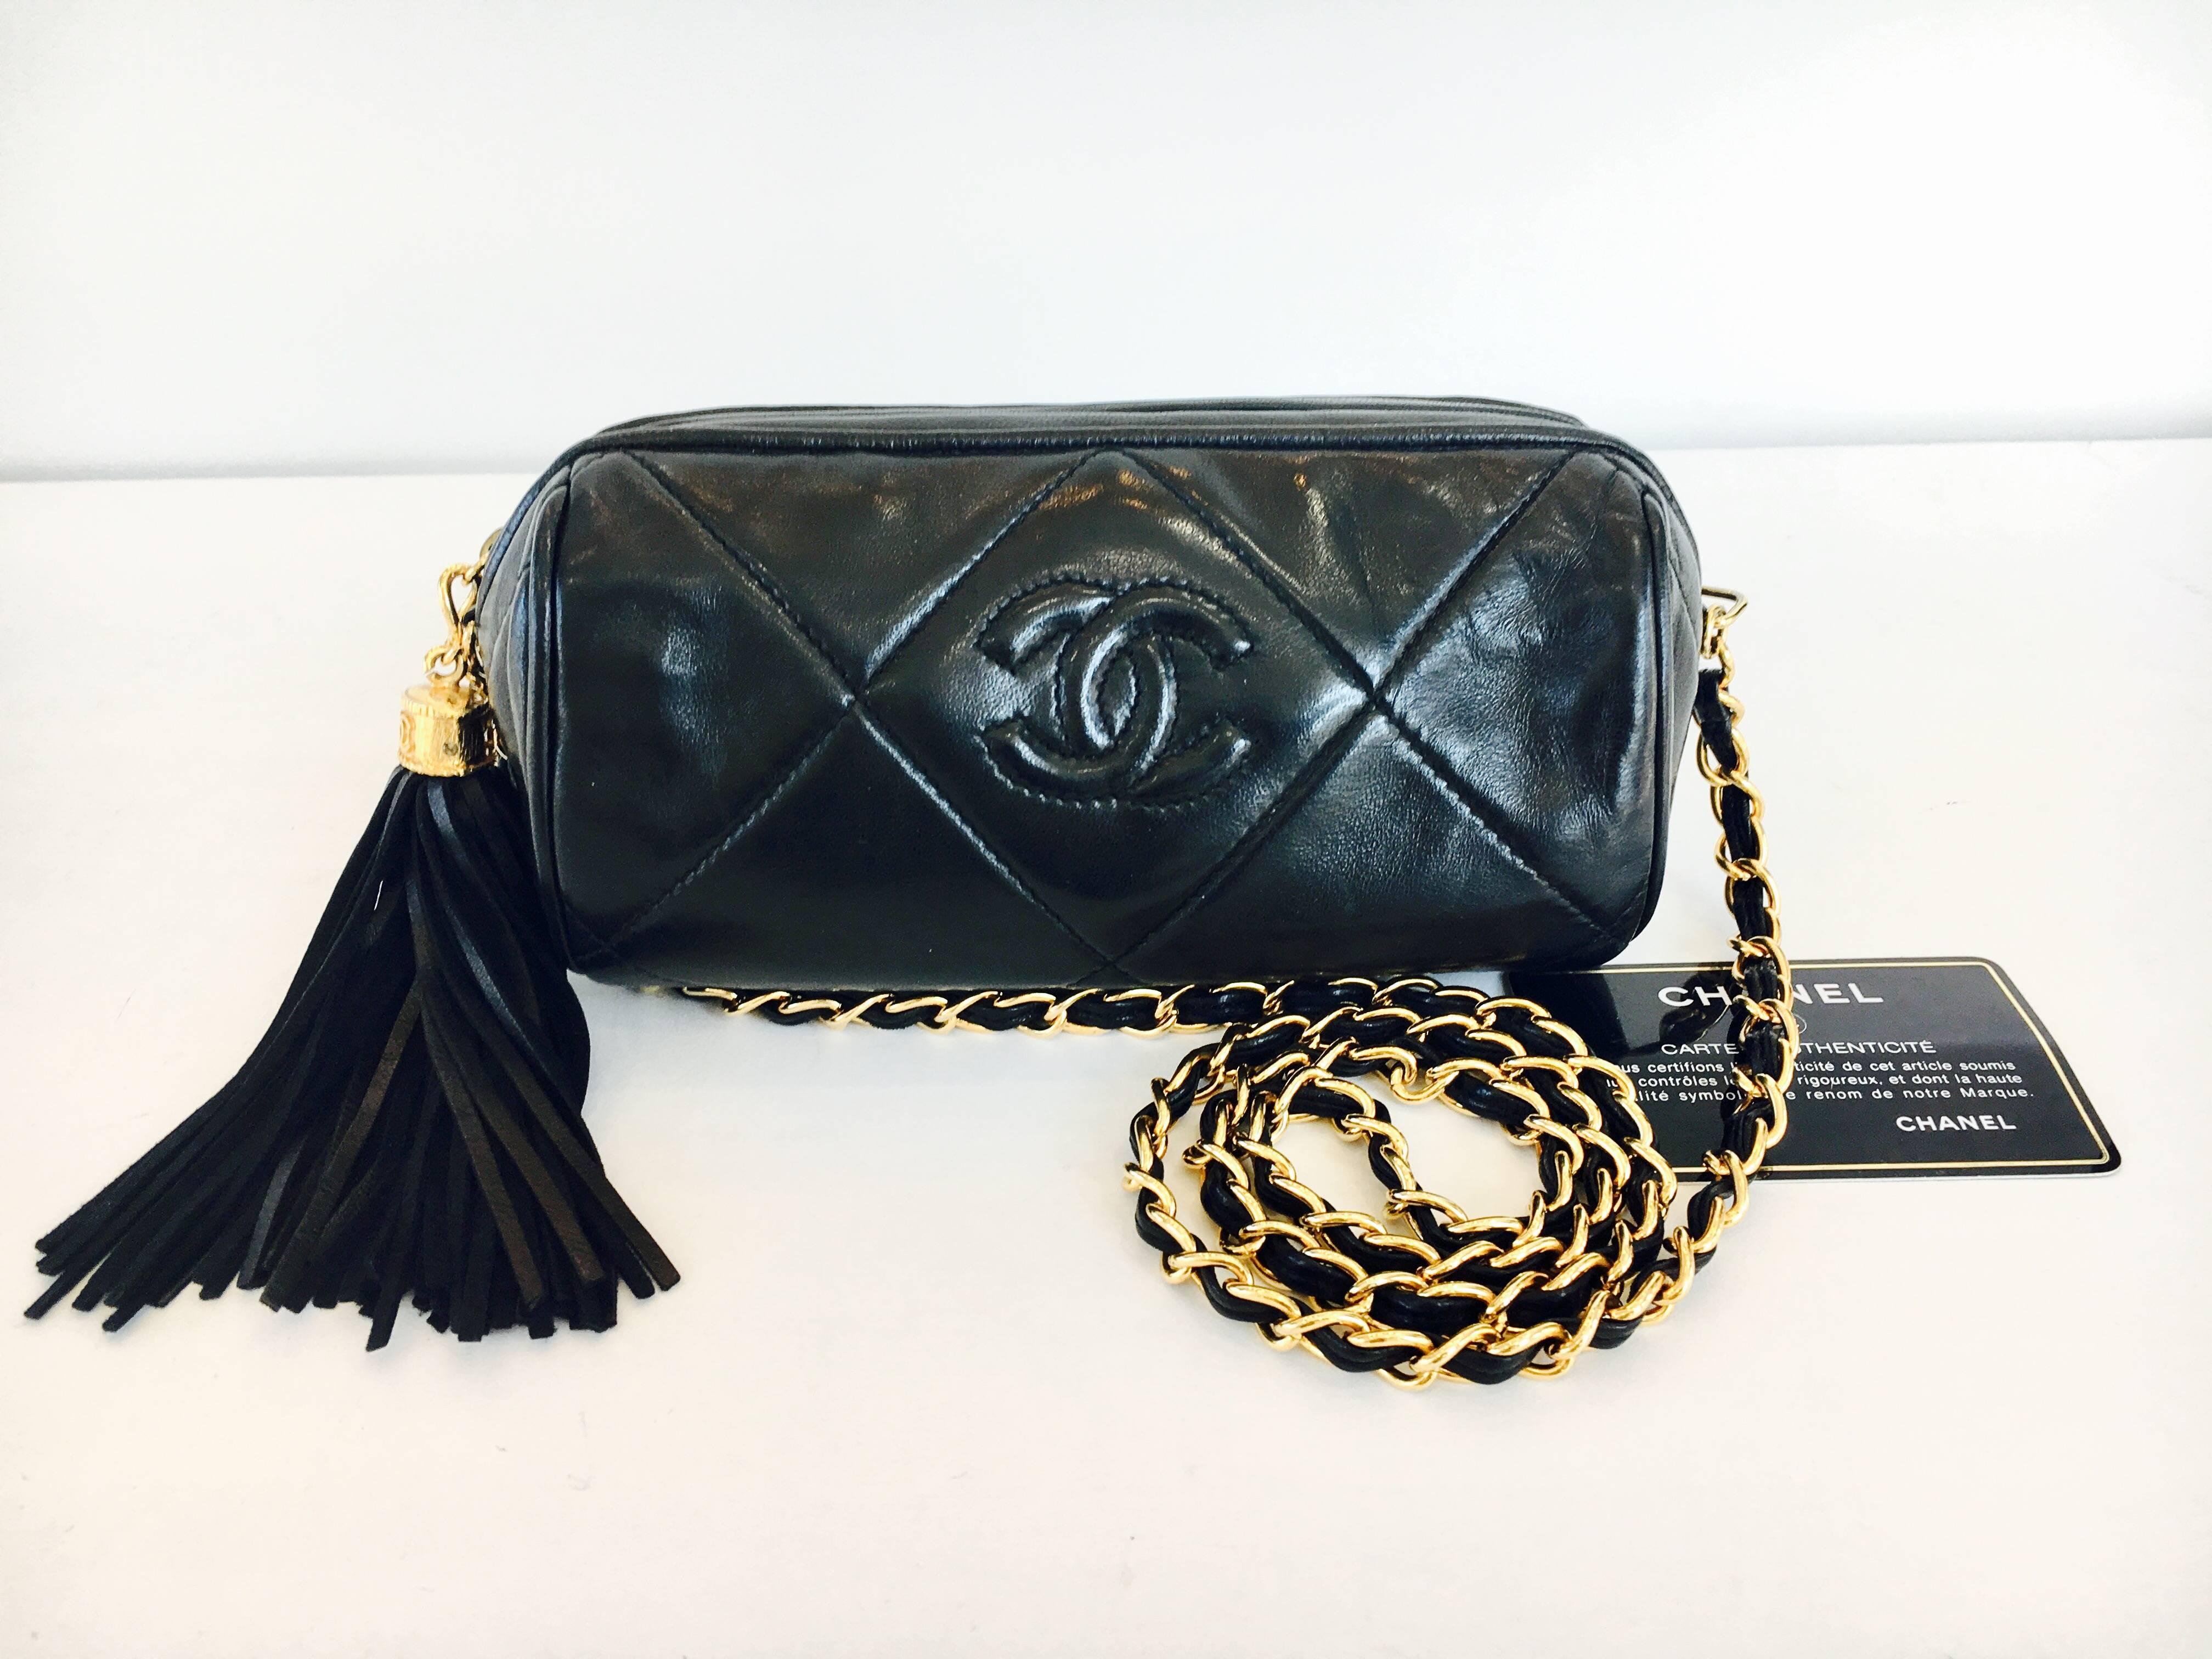 Lovely Bombolino shoulder bag by Chanel. Patent leather and gold hardware. This piece is made of lambskin. Measurements: 18 cm x 9 cm x 8 cm.
According to the dentification code (0665050) the item dates back to 1986 / 1989.
As the pictures show, the